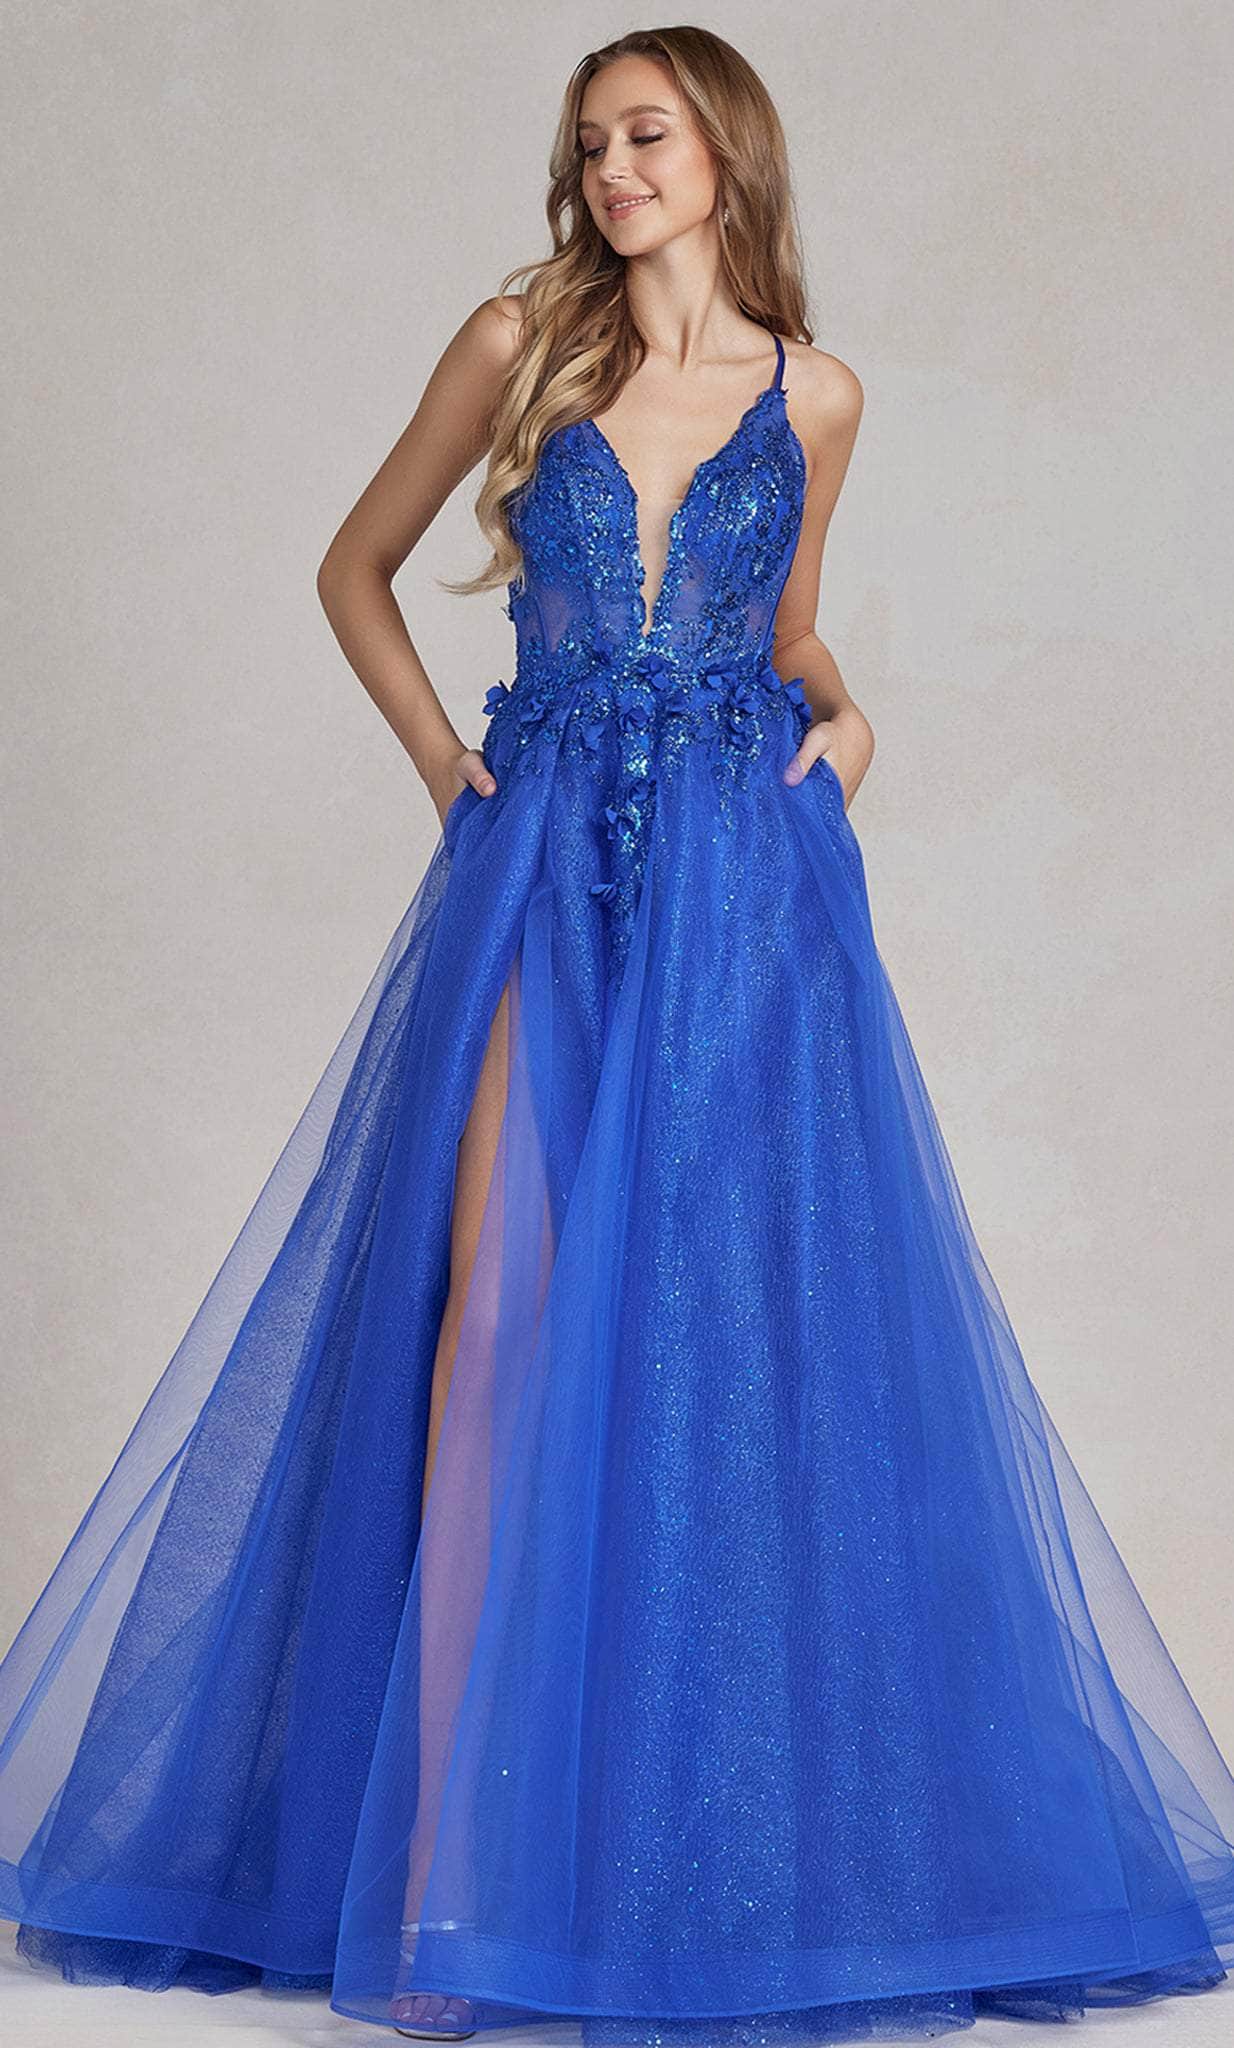 Image of Nox Anabel C1113 - Tulle Skirt Prom Gown